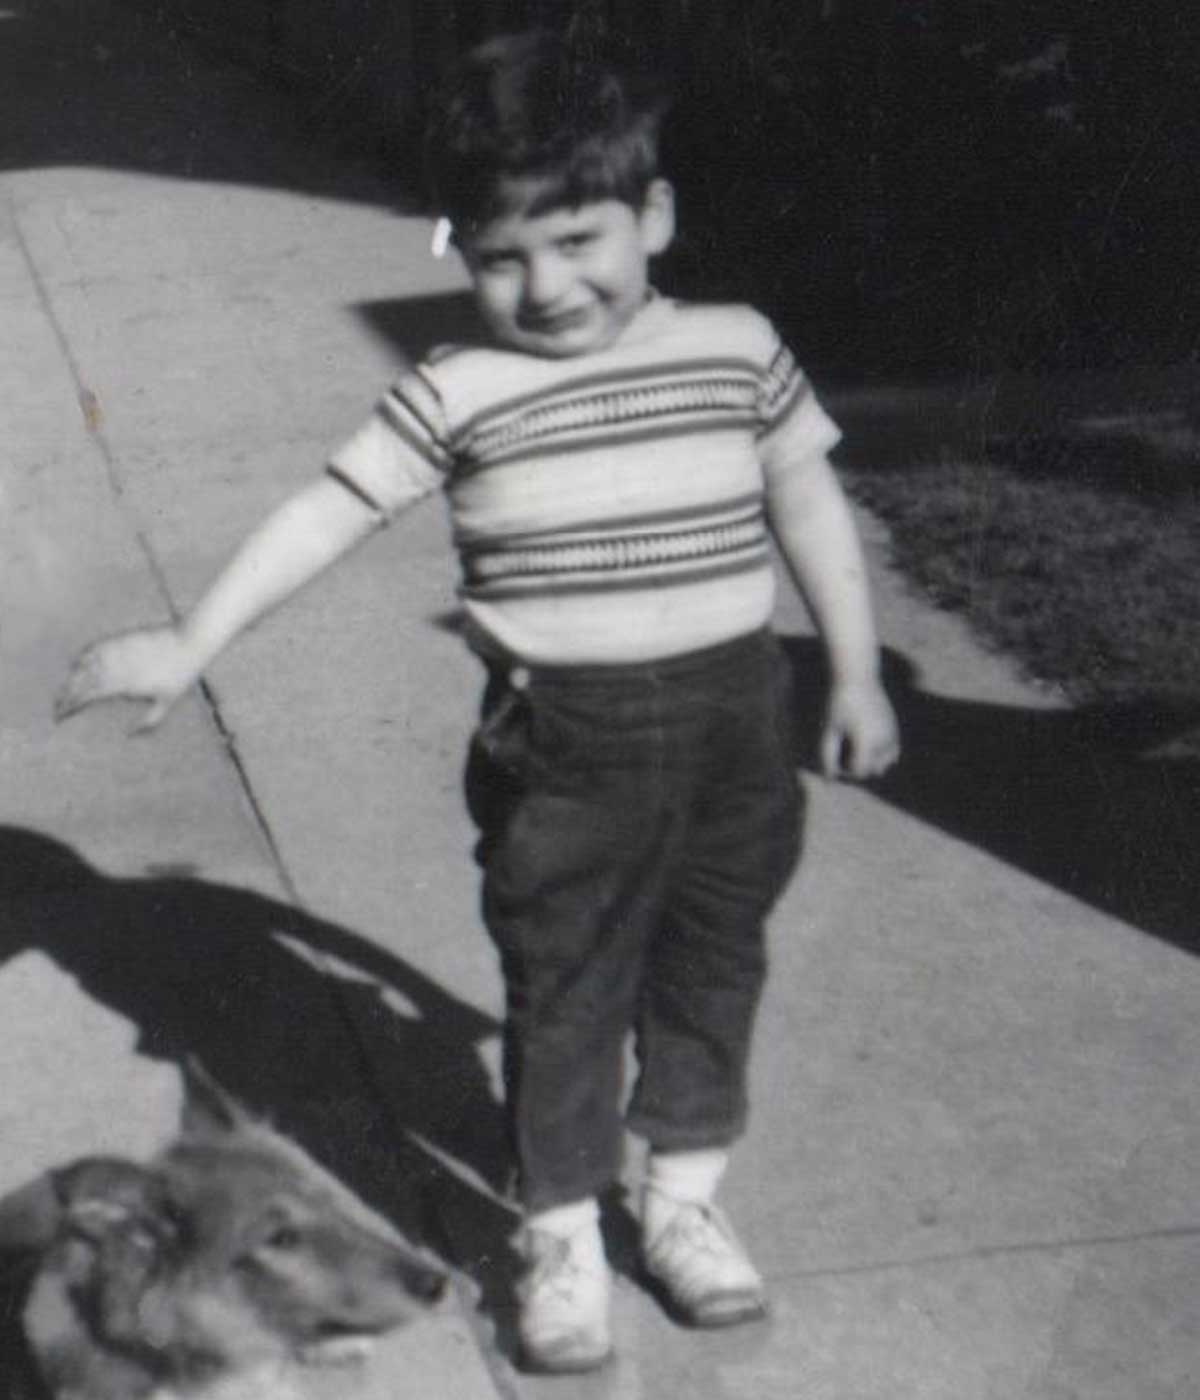 A photo of David as a child for the Gary Taubes interview.